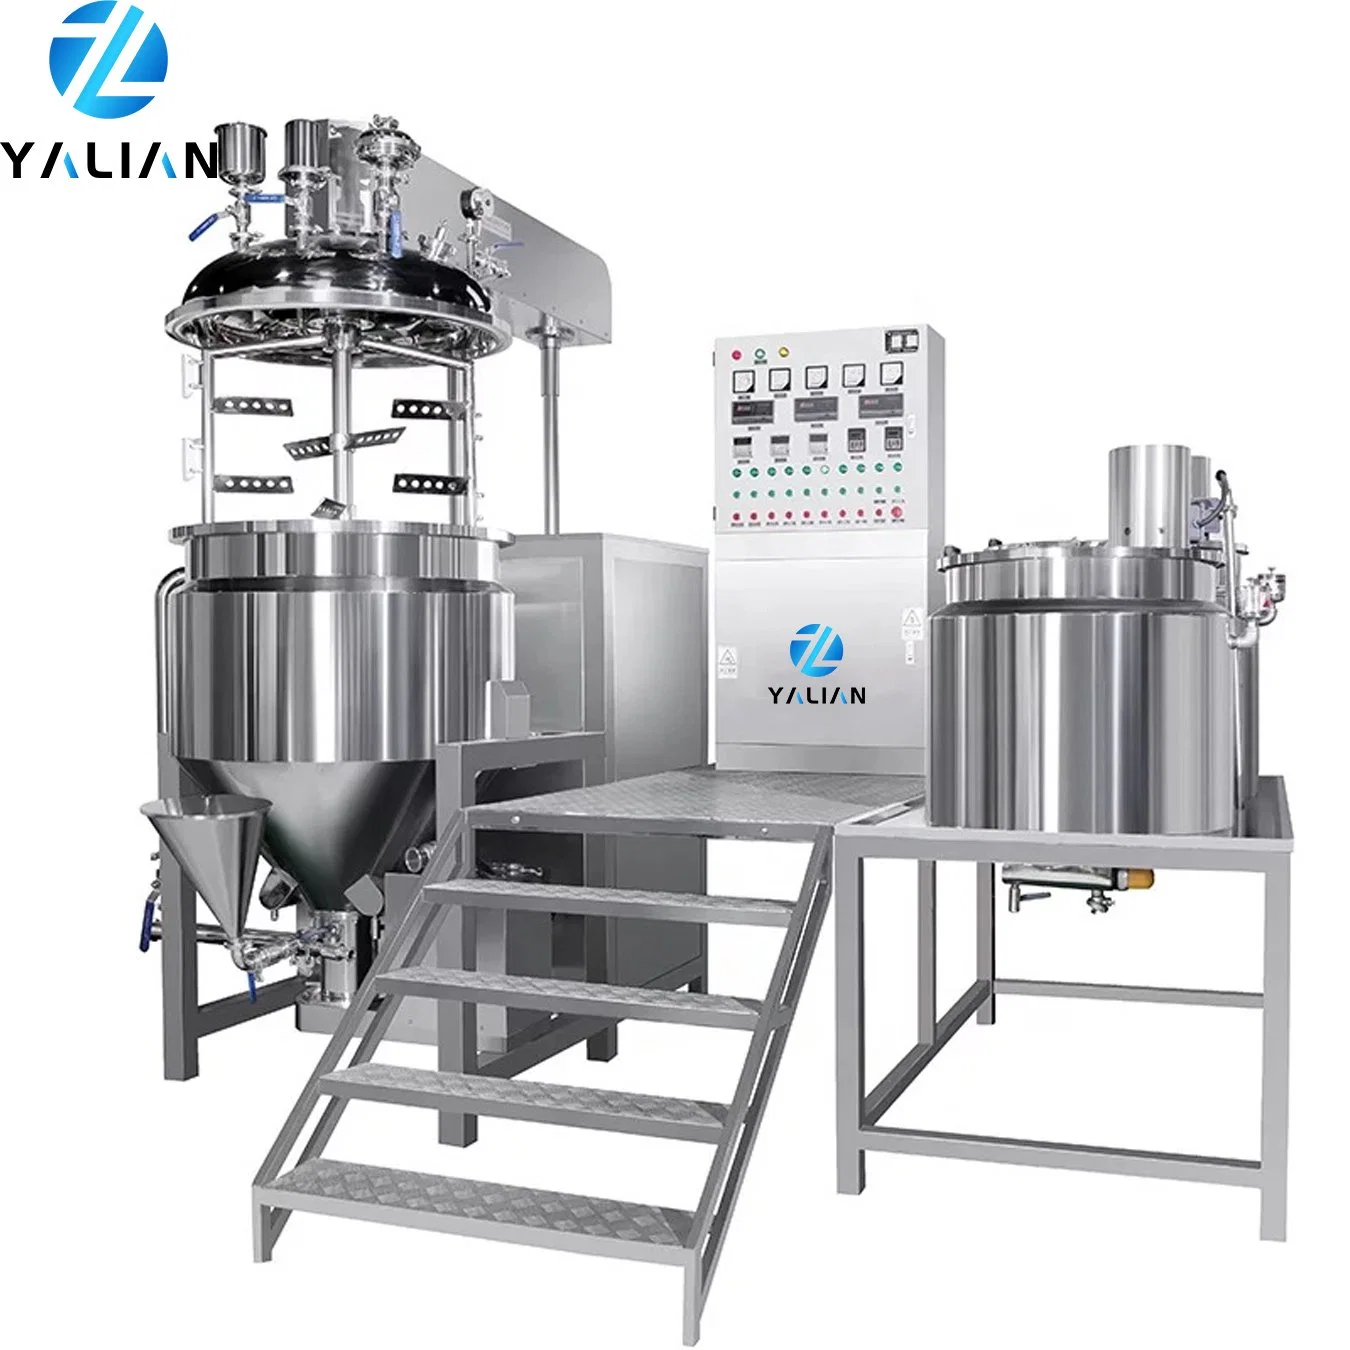 Mixing Vessel Pharmaceutical Chemical Pressure Vessels Manufacturer